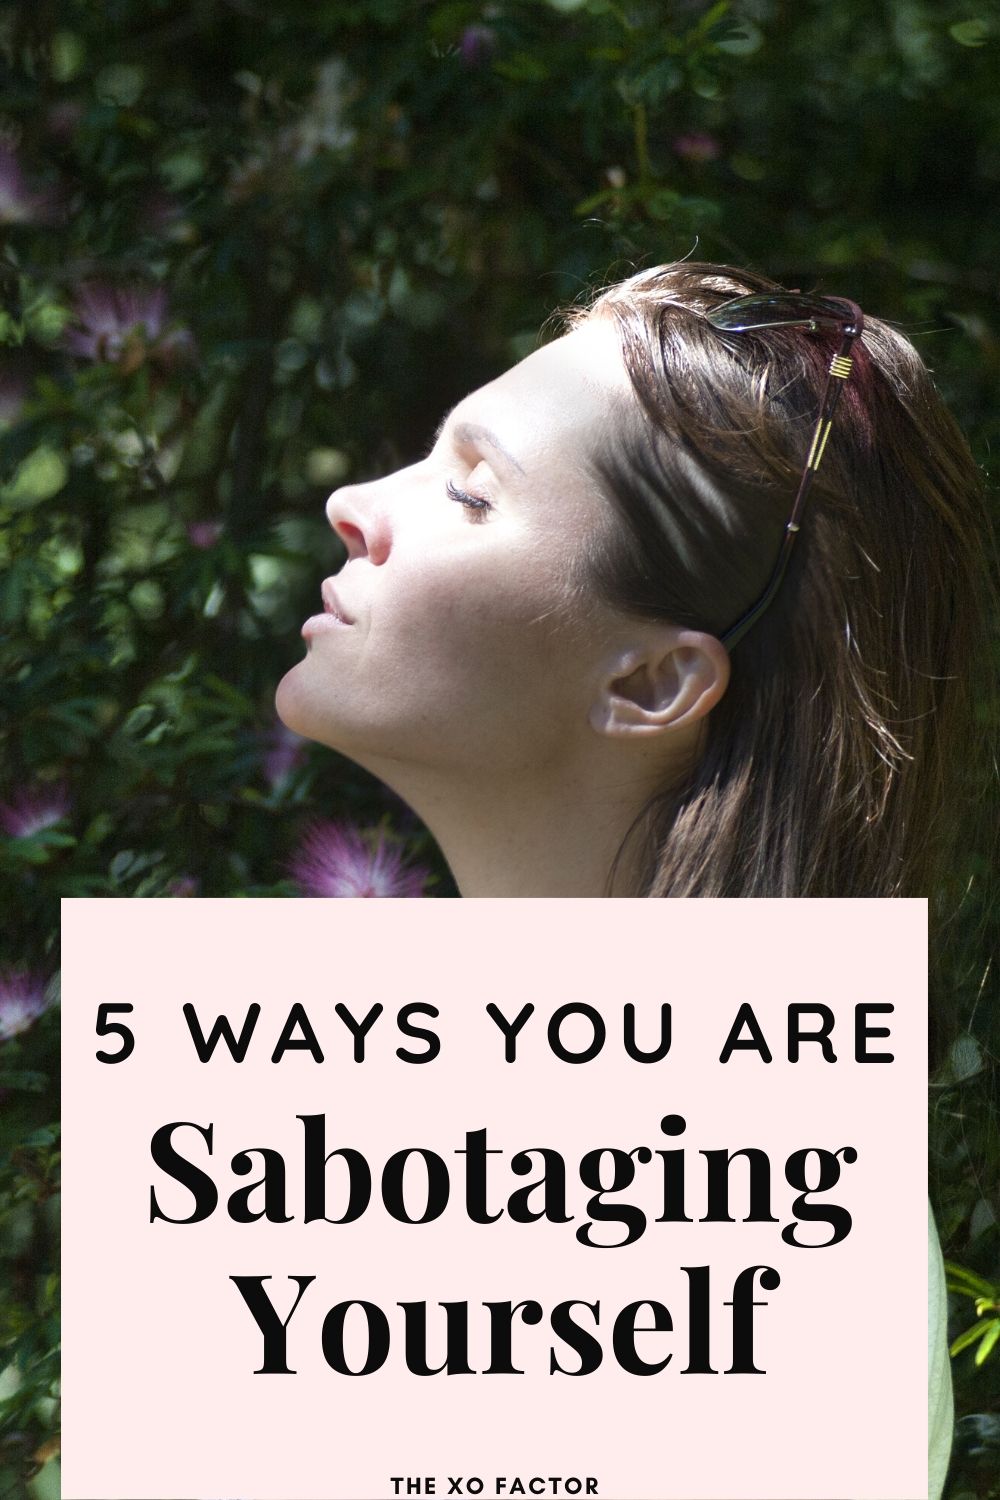 5 ways you are sabotaging yourself